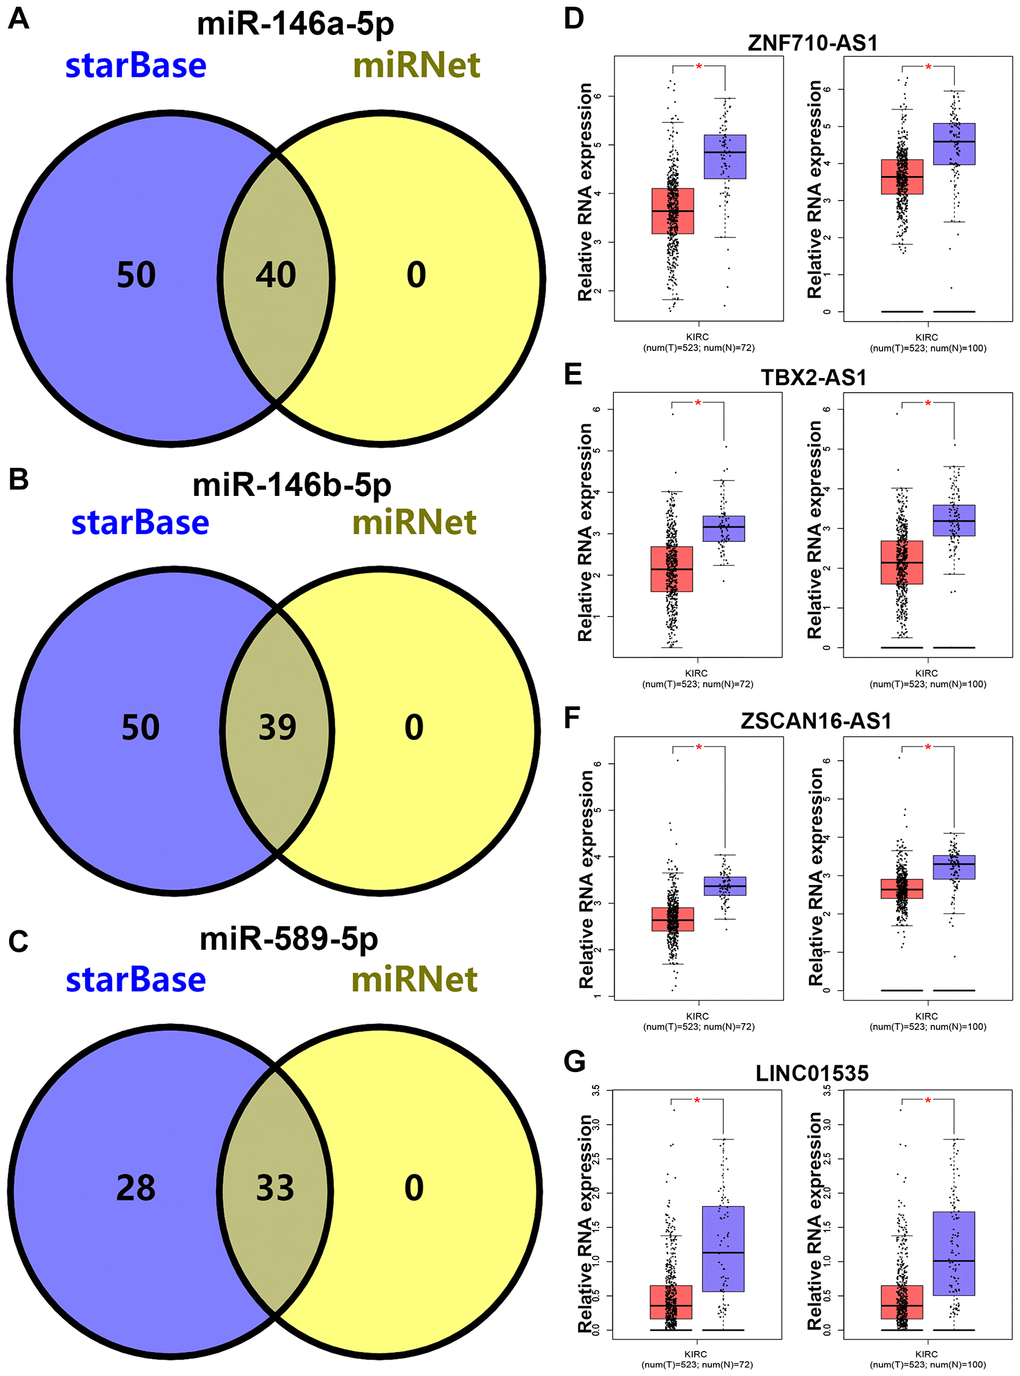 Prediction and analysis for upstream lncRNAs of candidate miRNAs in KIRC. The intersection analysis for lncRNAs of miR-146a-5p (A), miR-146b-5p (B) and miR-589-5p (C) predicted by starBase and miRNet databases. The expression levels of ZNF710-AS1 (D), TBX2-AS1 (E), ZSCAN16-AS1 (F) and LINC01535 (G) in KIRC compared with normal controls. *P 